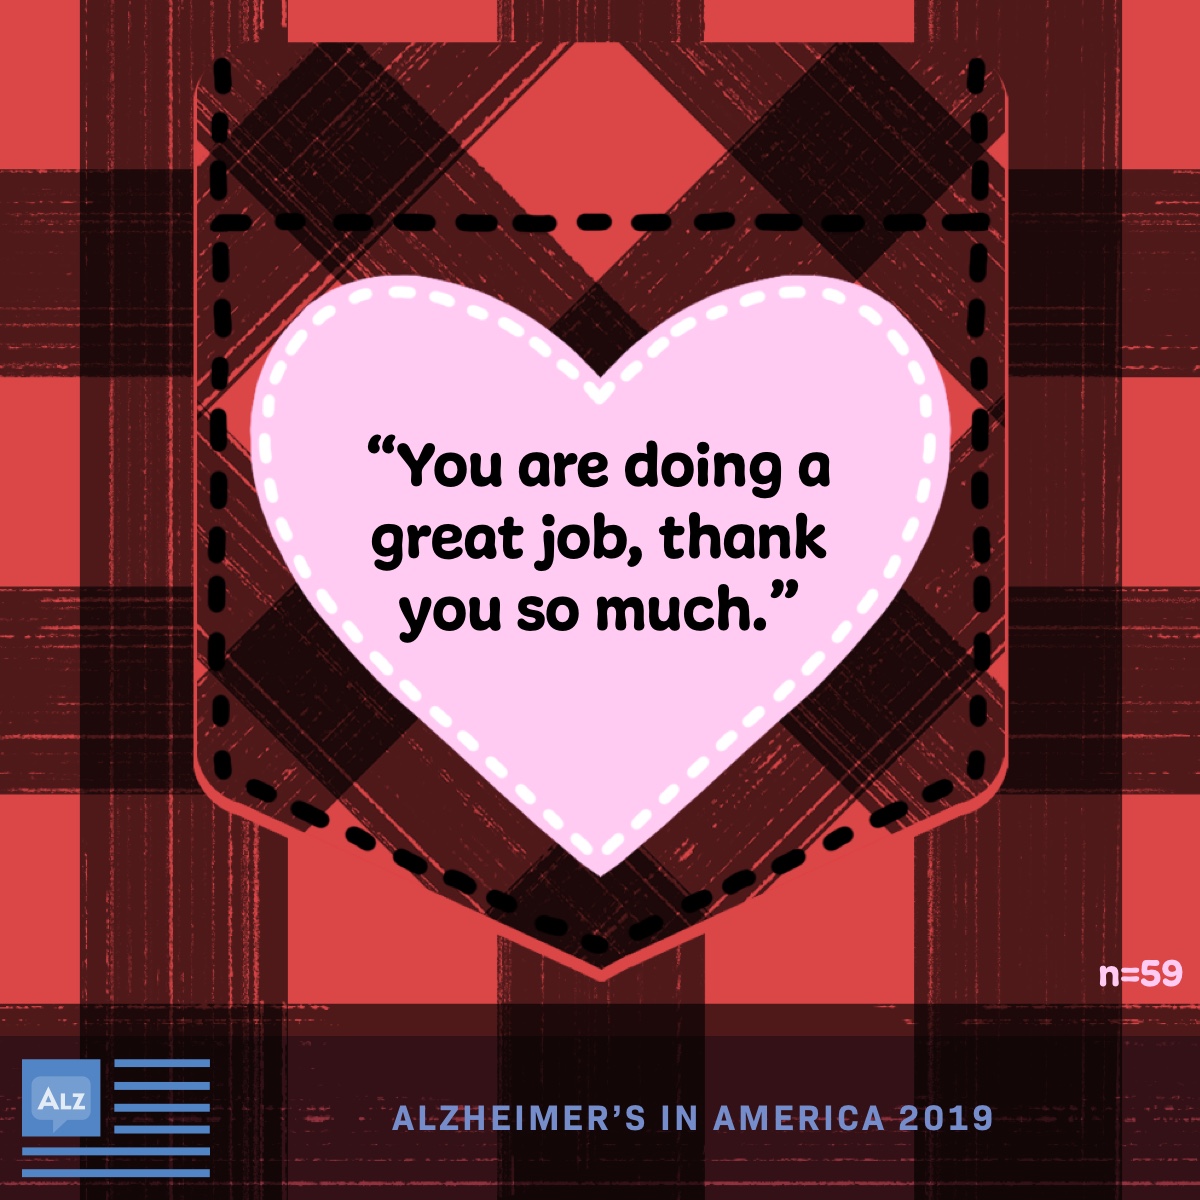 Quote from an Alzheimer’s patient to their caregiver “You are doing a great job, thank you so much.”